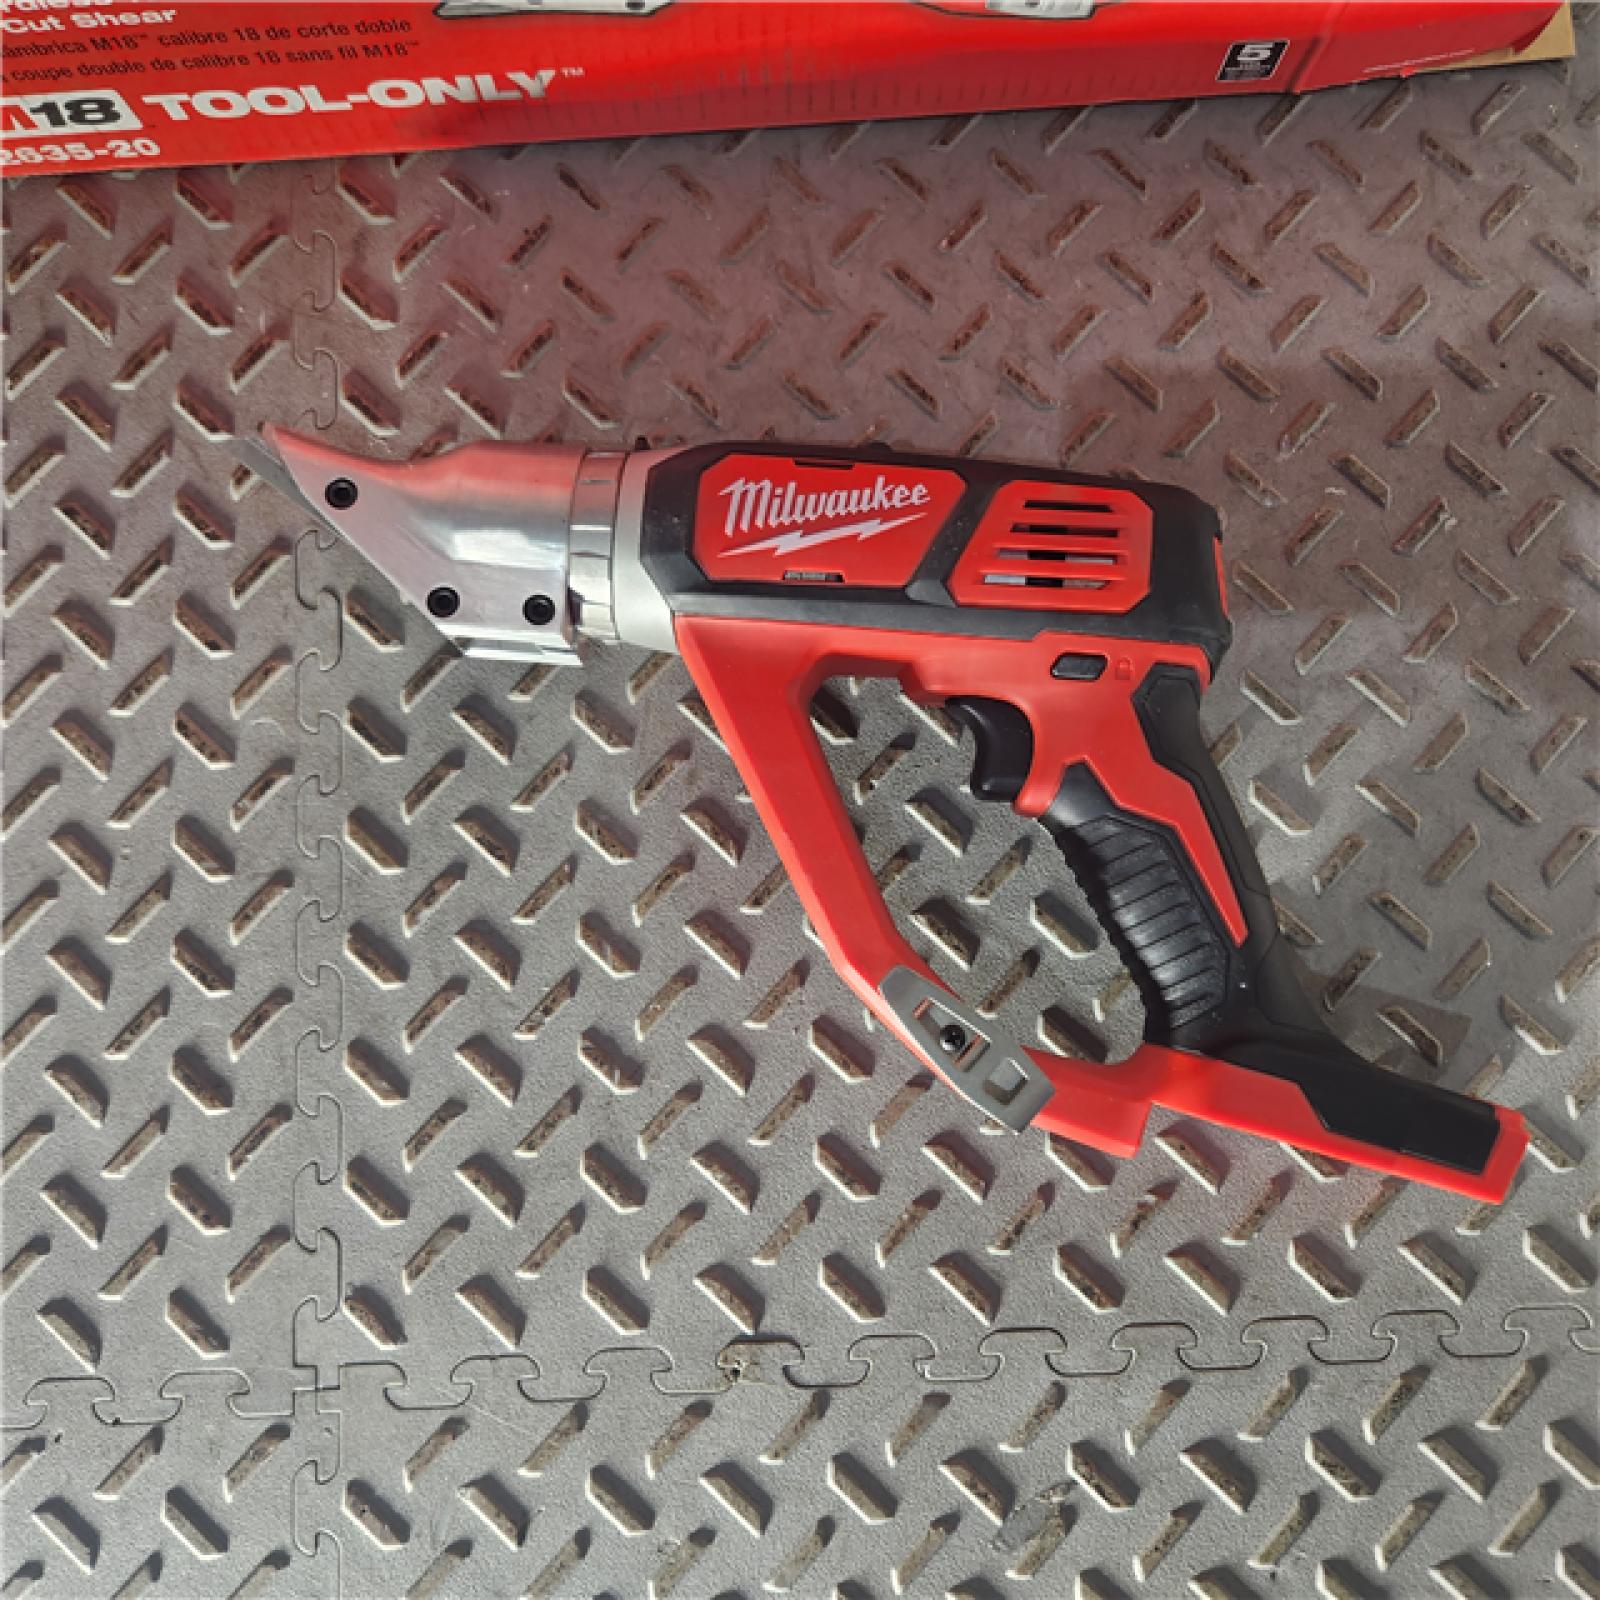 Houston Location AS IS - Milwaukee M18 Cordless 18 Gauge Double Cut Shear In Good Condition